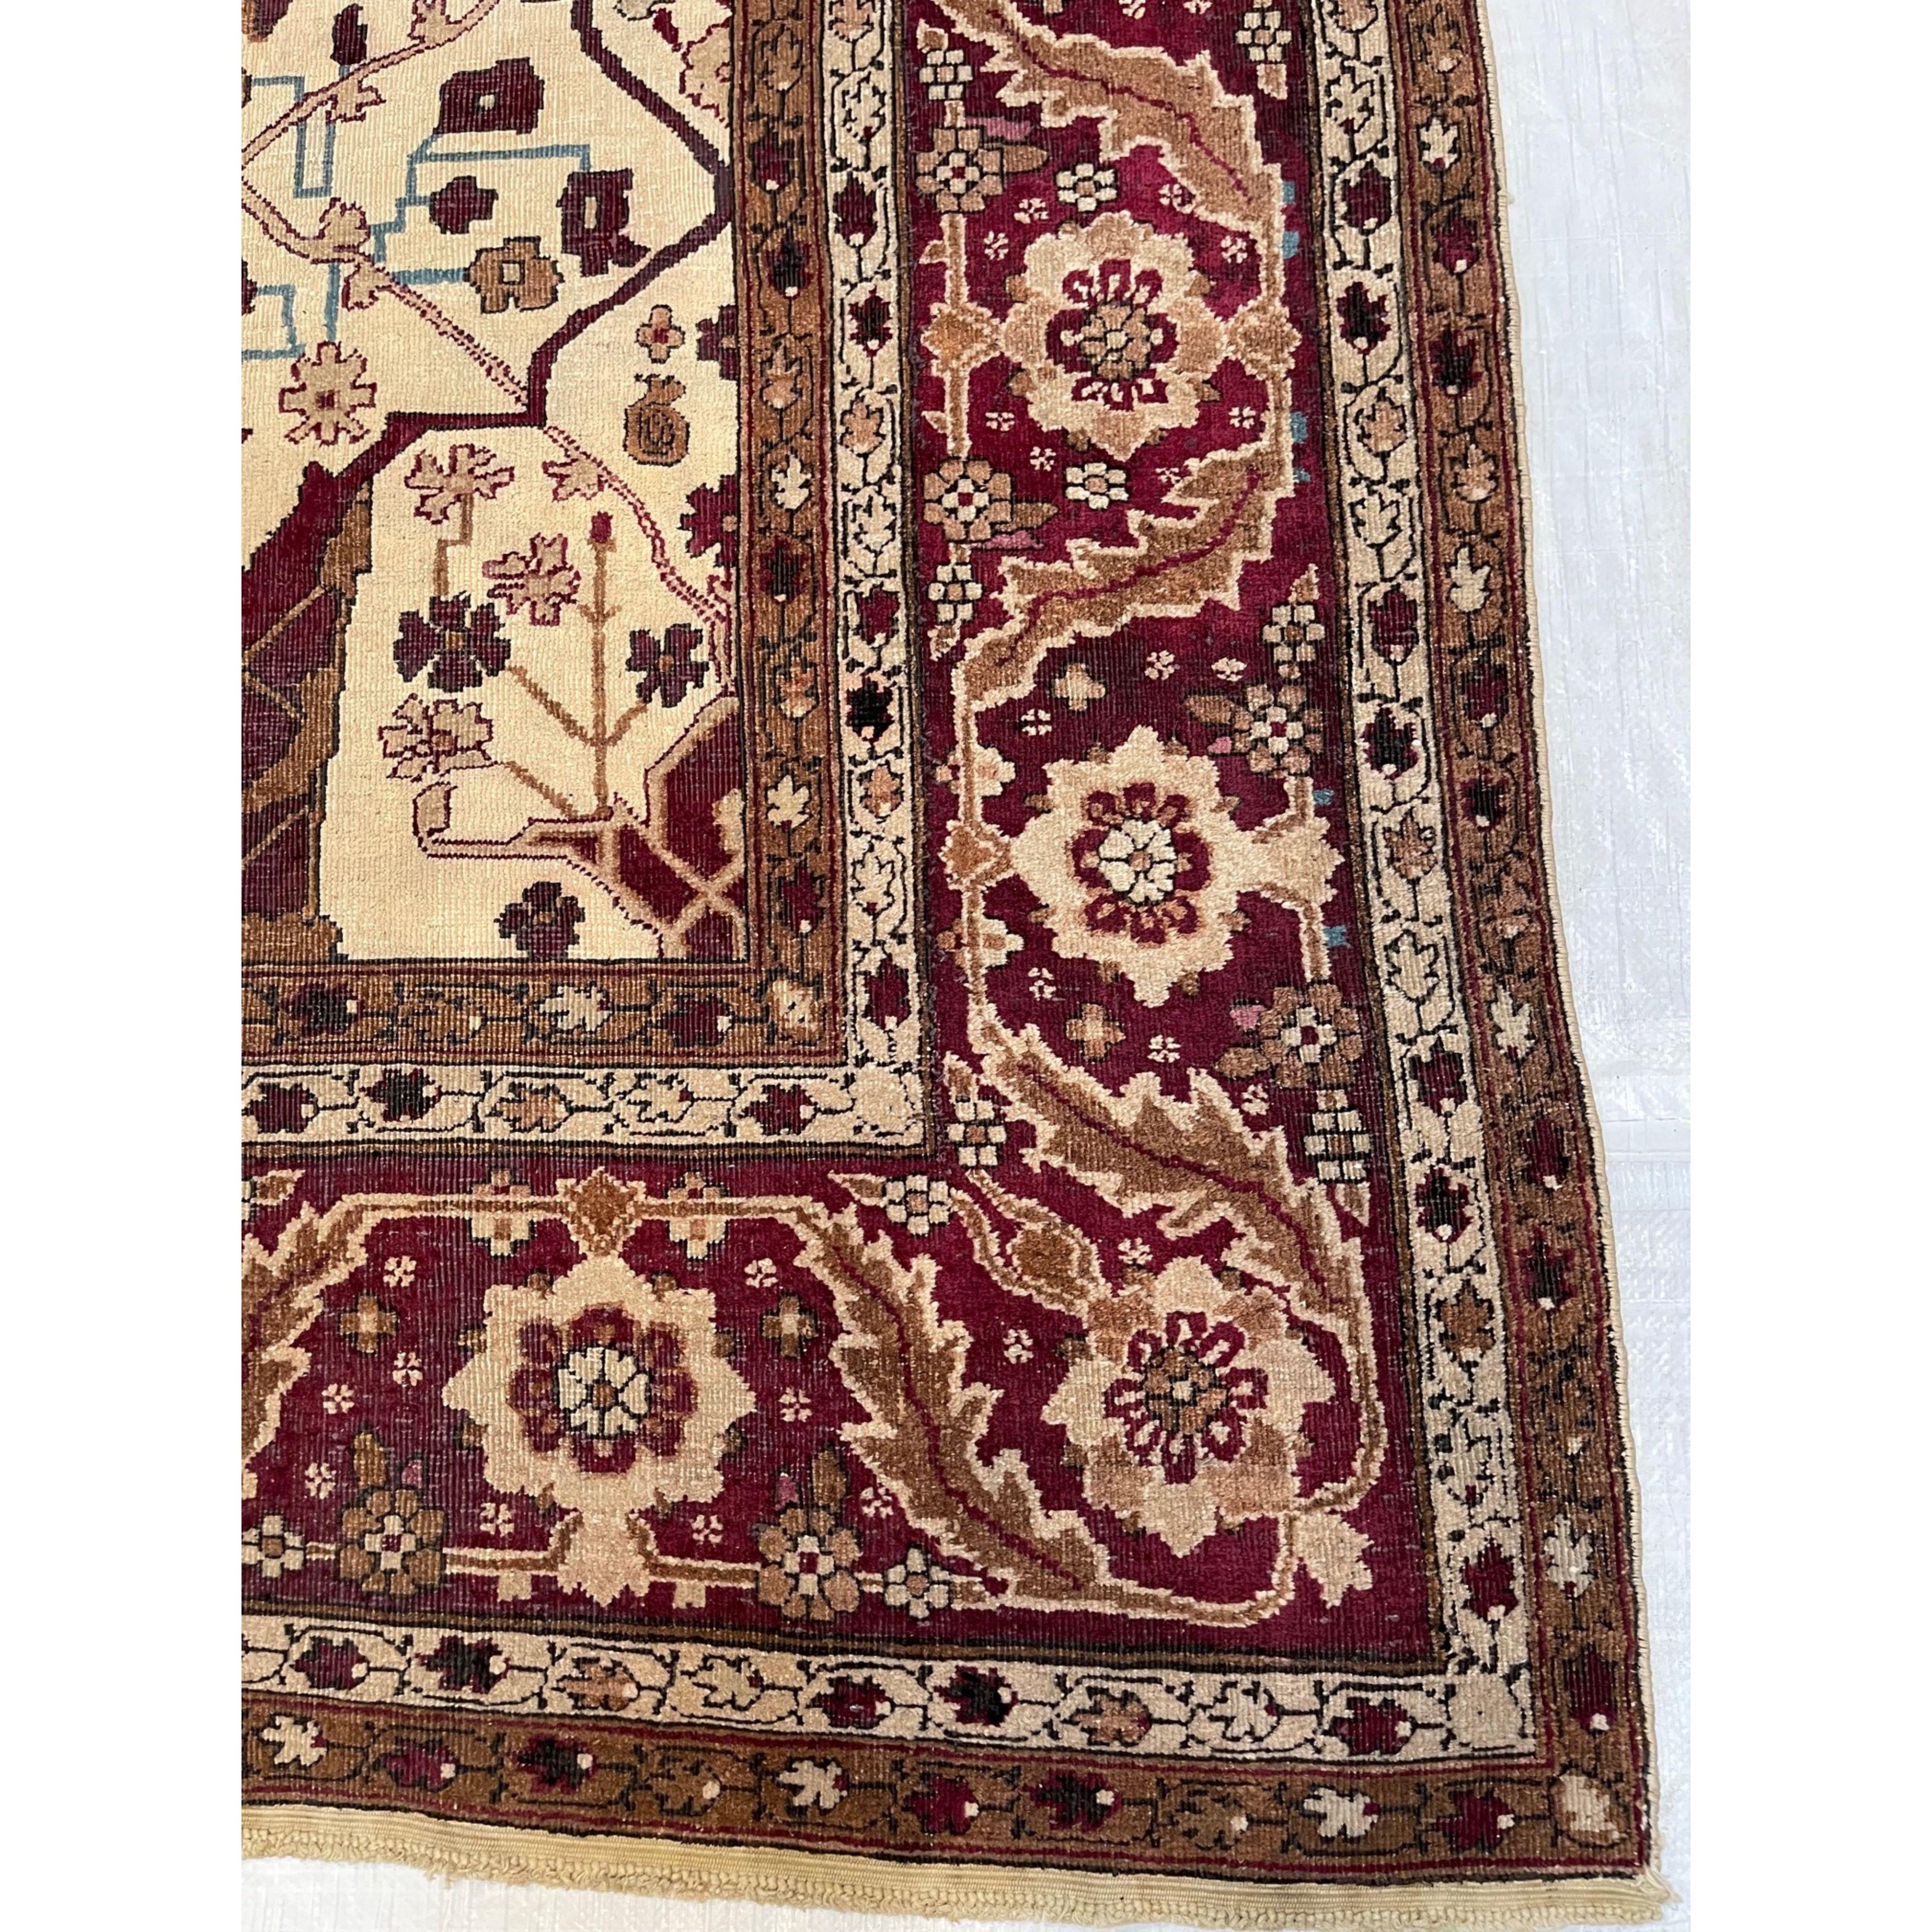 Antique Agra Rugs Agra has been a major center of area rug and carpet production since the great period of Mughal art in the sixteenth and seventeenth centuries. When the carpet industry was revived there under British rule in the nineteenth